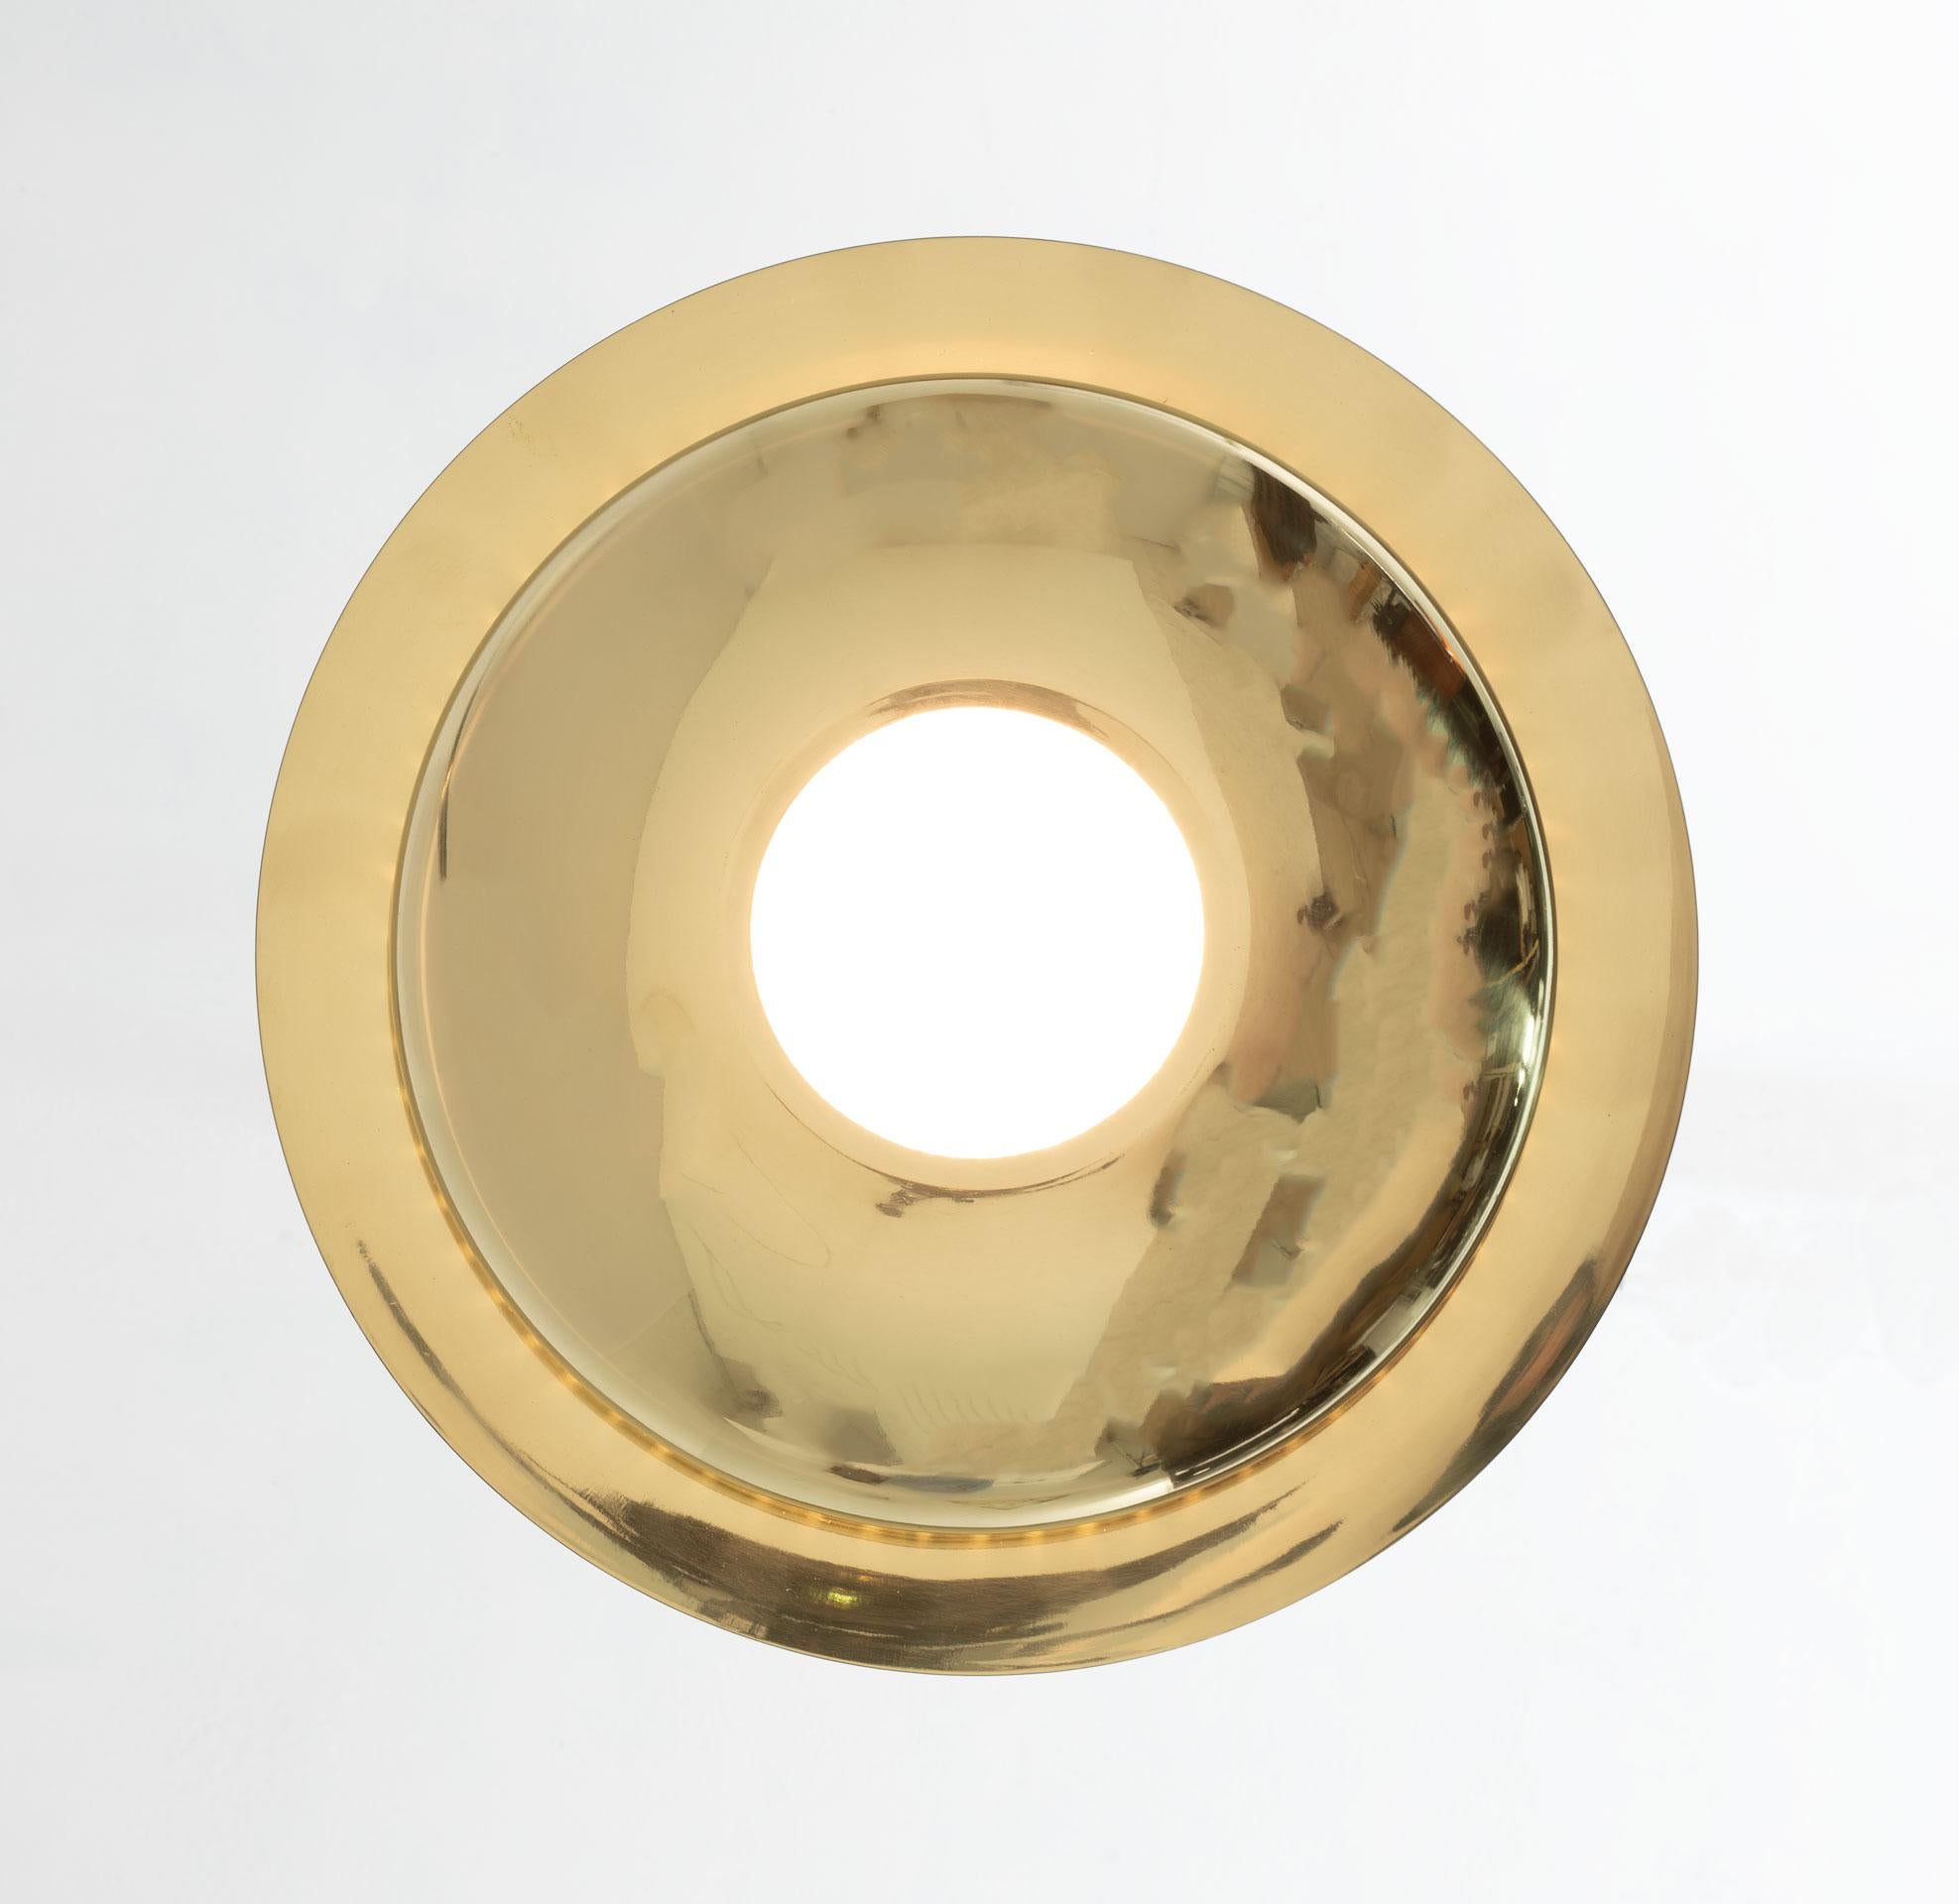 Afra & Tobia Scarpa Mid-century Modern Brass Pendant Nictea by Flos, Italy, 1961 For Sale 3